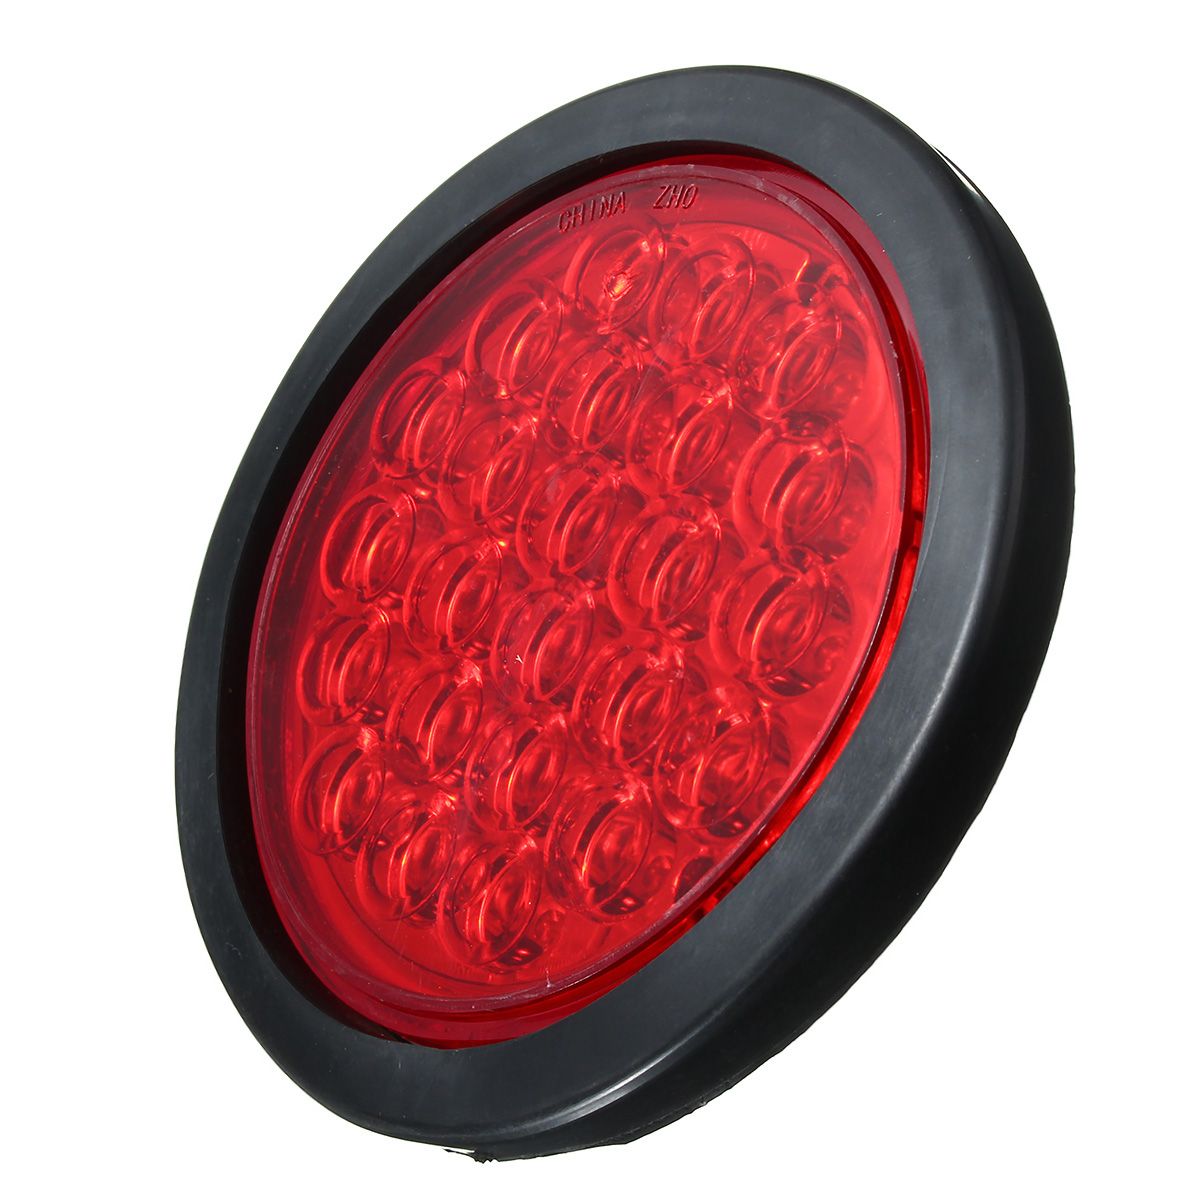 24-LED-Red-White-Yellow-Round-Rear-Tail-Stop-Light-Brake-Lamp-Reflector-for-Truck-Trailer-Bus-Boat-1119961